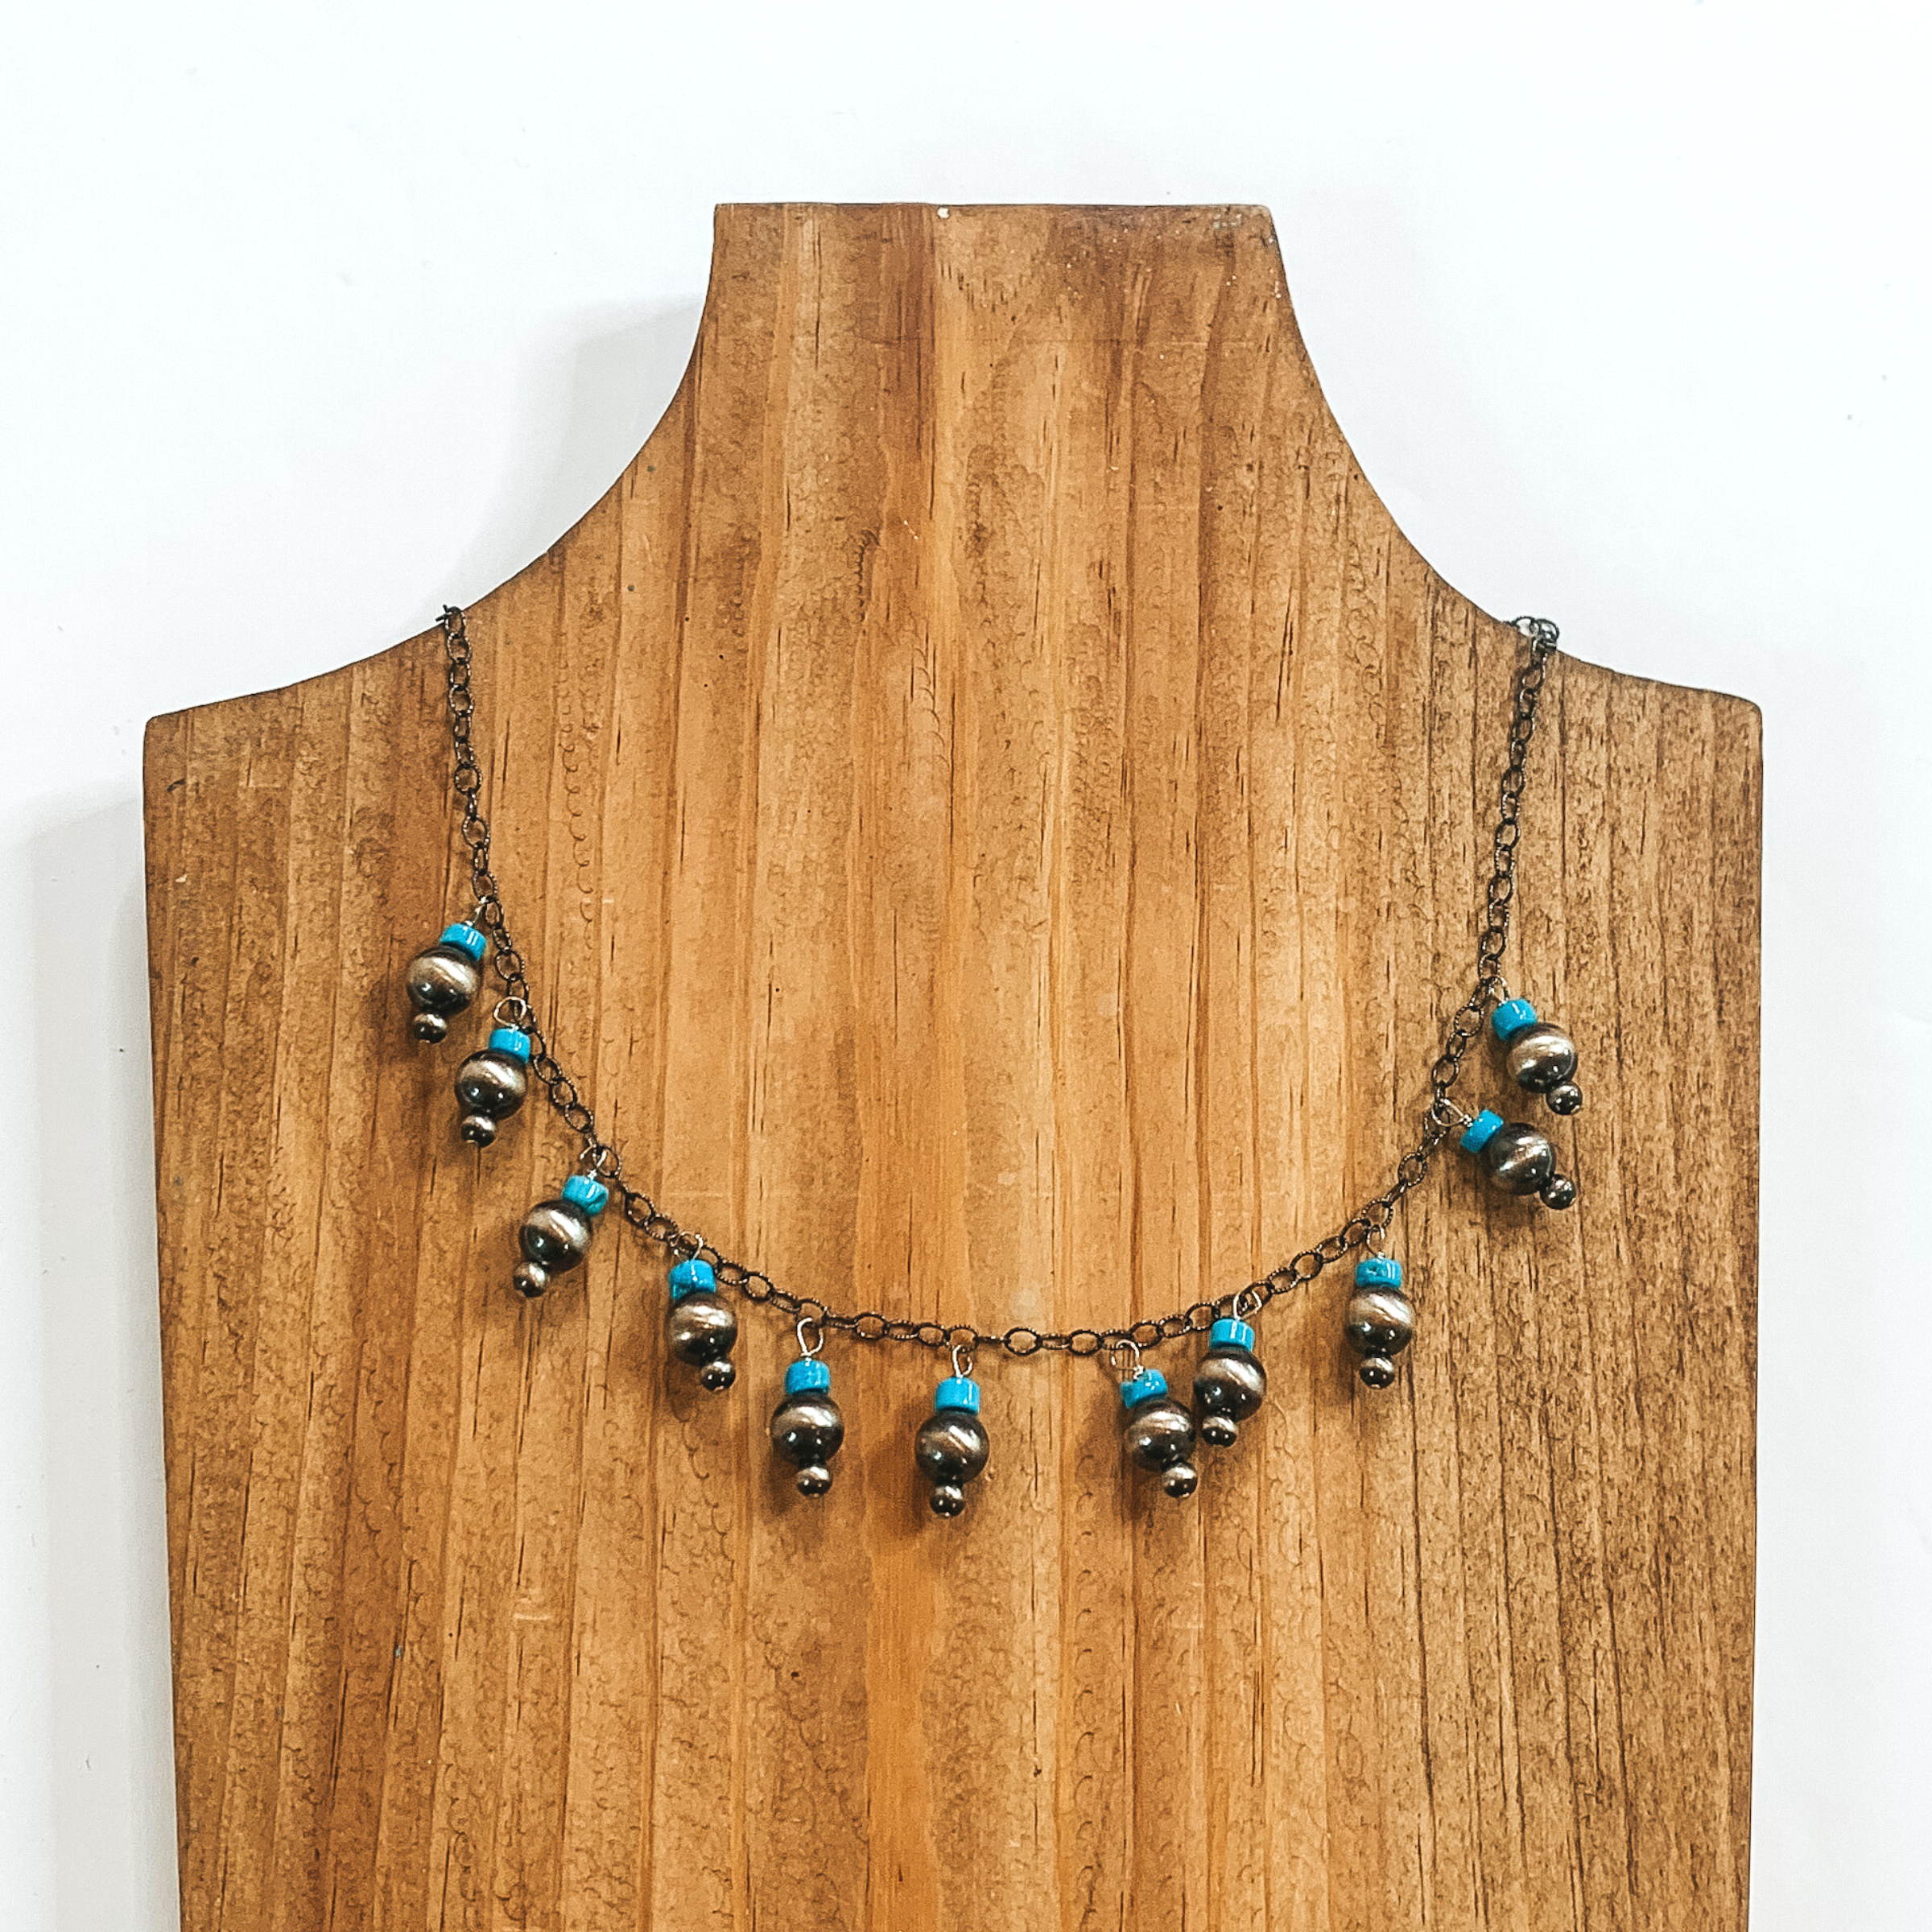 Silver chained necklace with charms that include a siver bead and turquoise bead stacked on each other. This necklace is pictured on a wood necklace holder on a white background. 